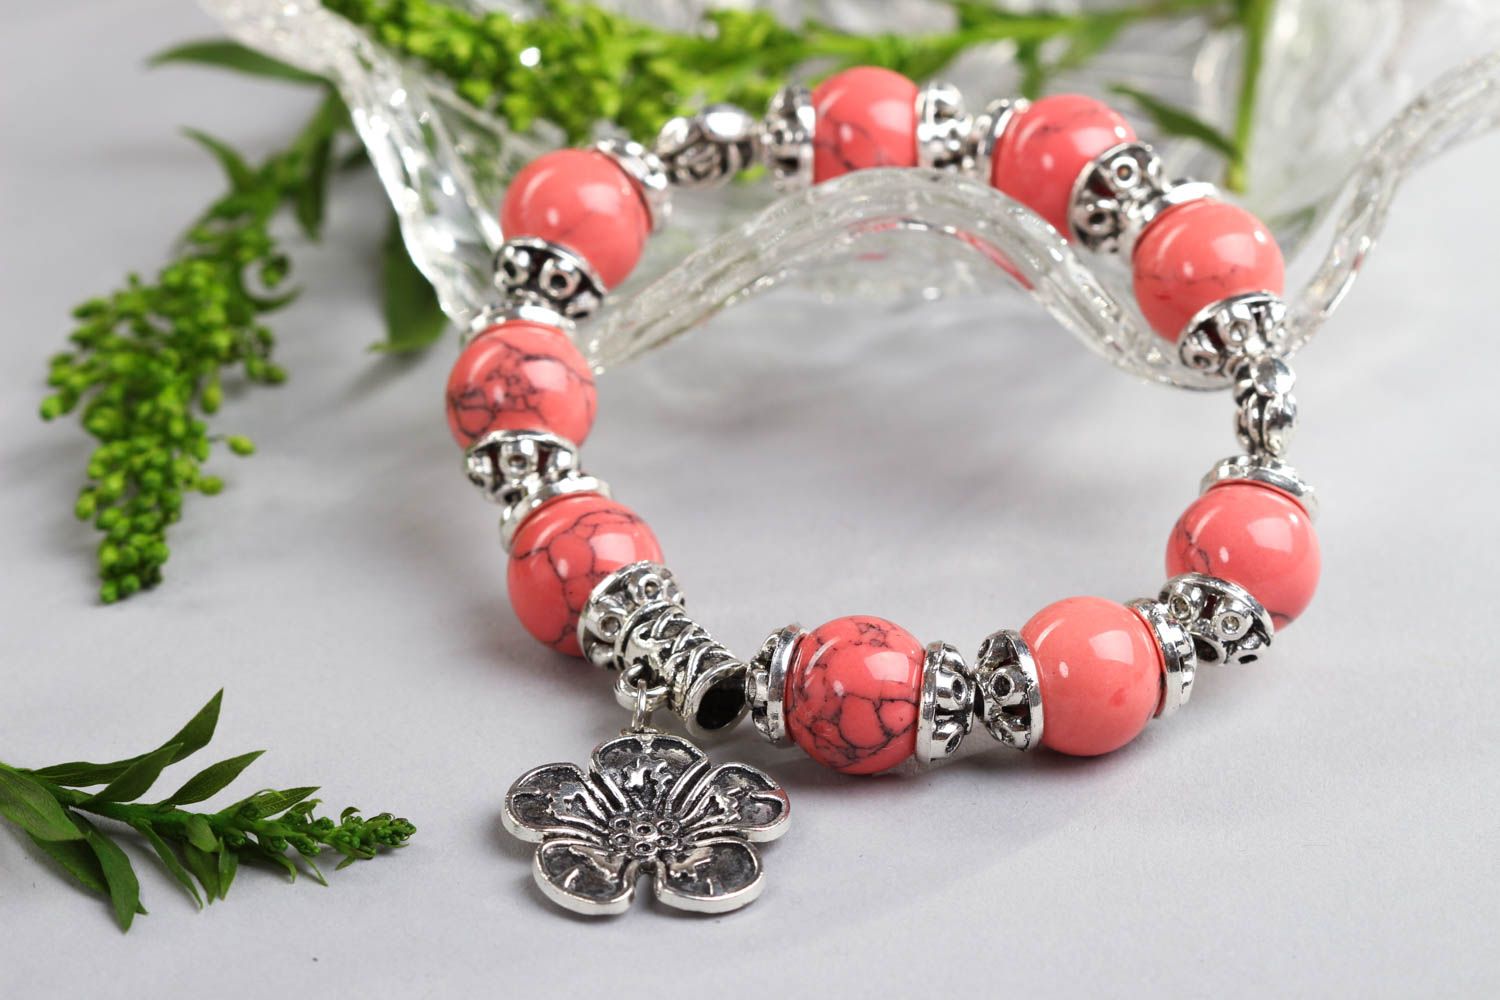 Vintage bracelet handmade coral bracelet jewelry with natural stones for women photo 1